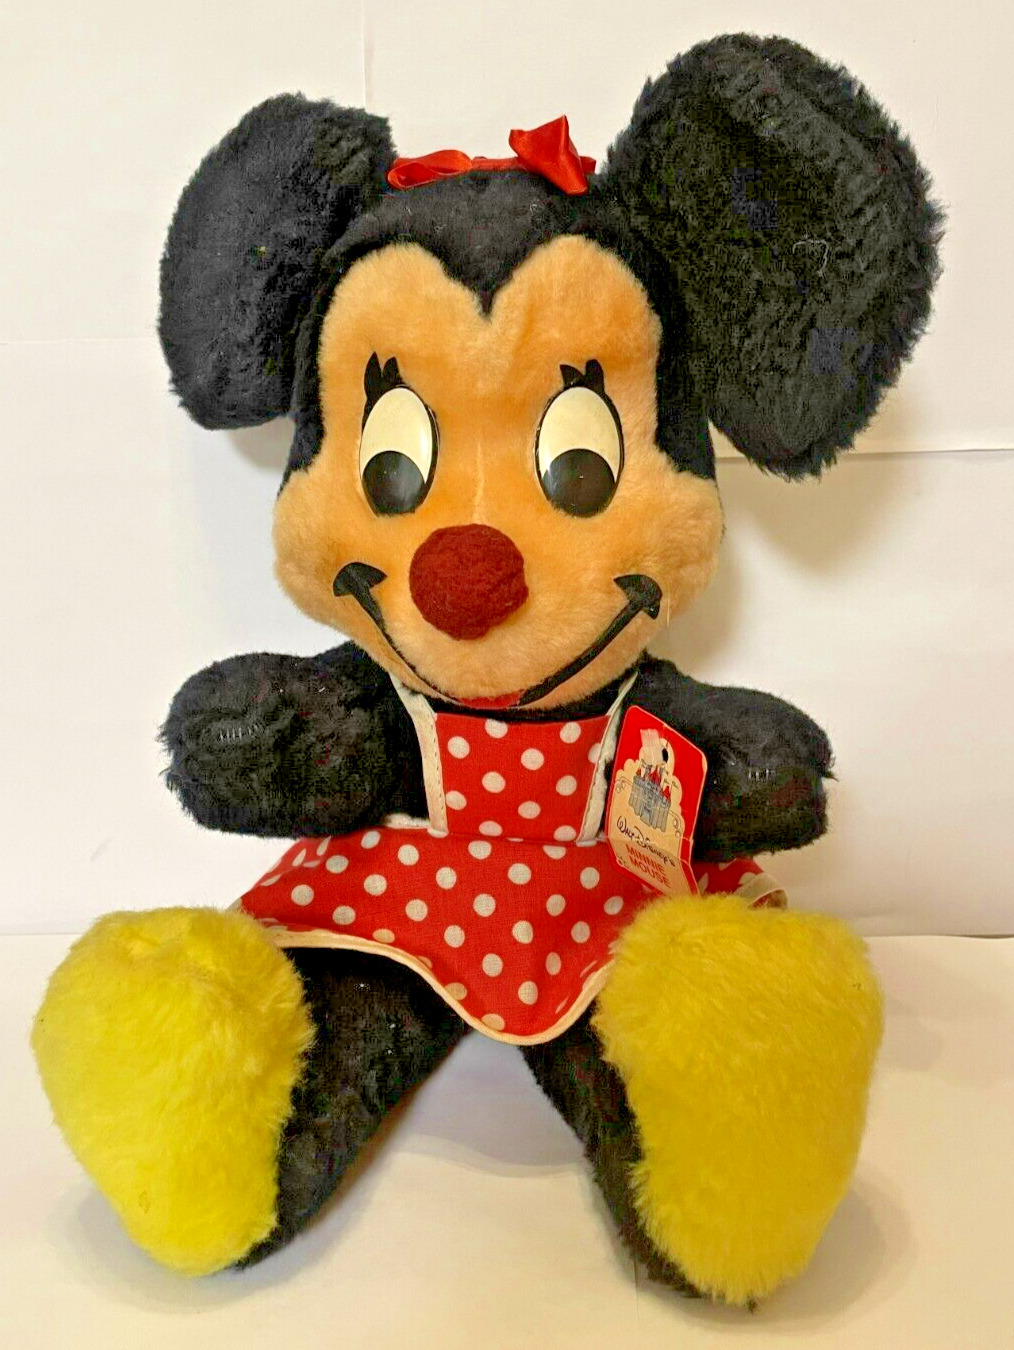 New With Tags Vintage Mini Mouse  1950's-60's Era Stuffed Doll Please Read